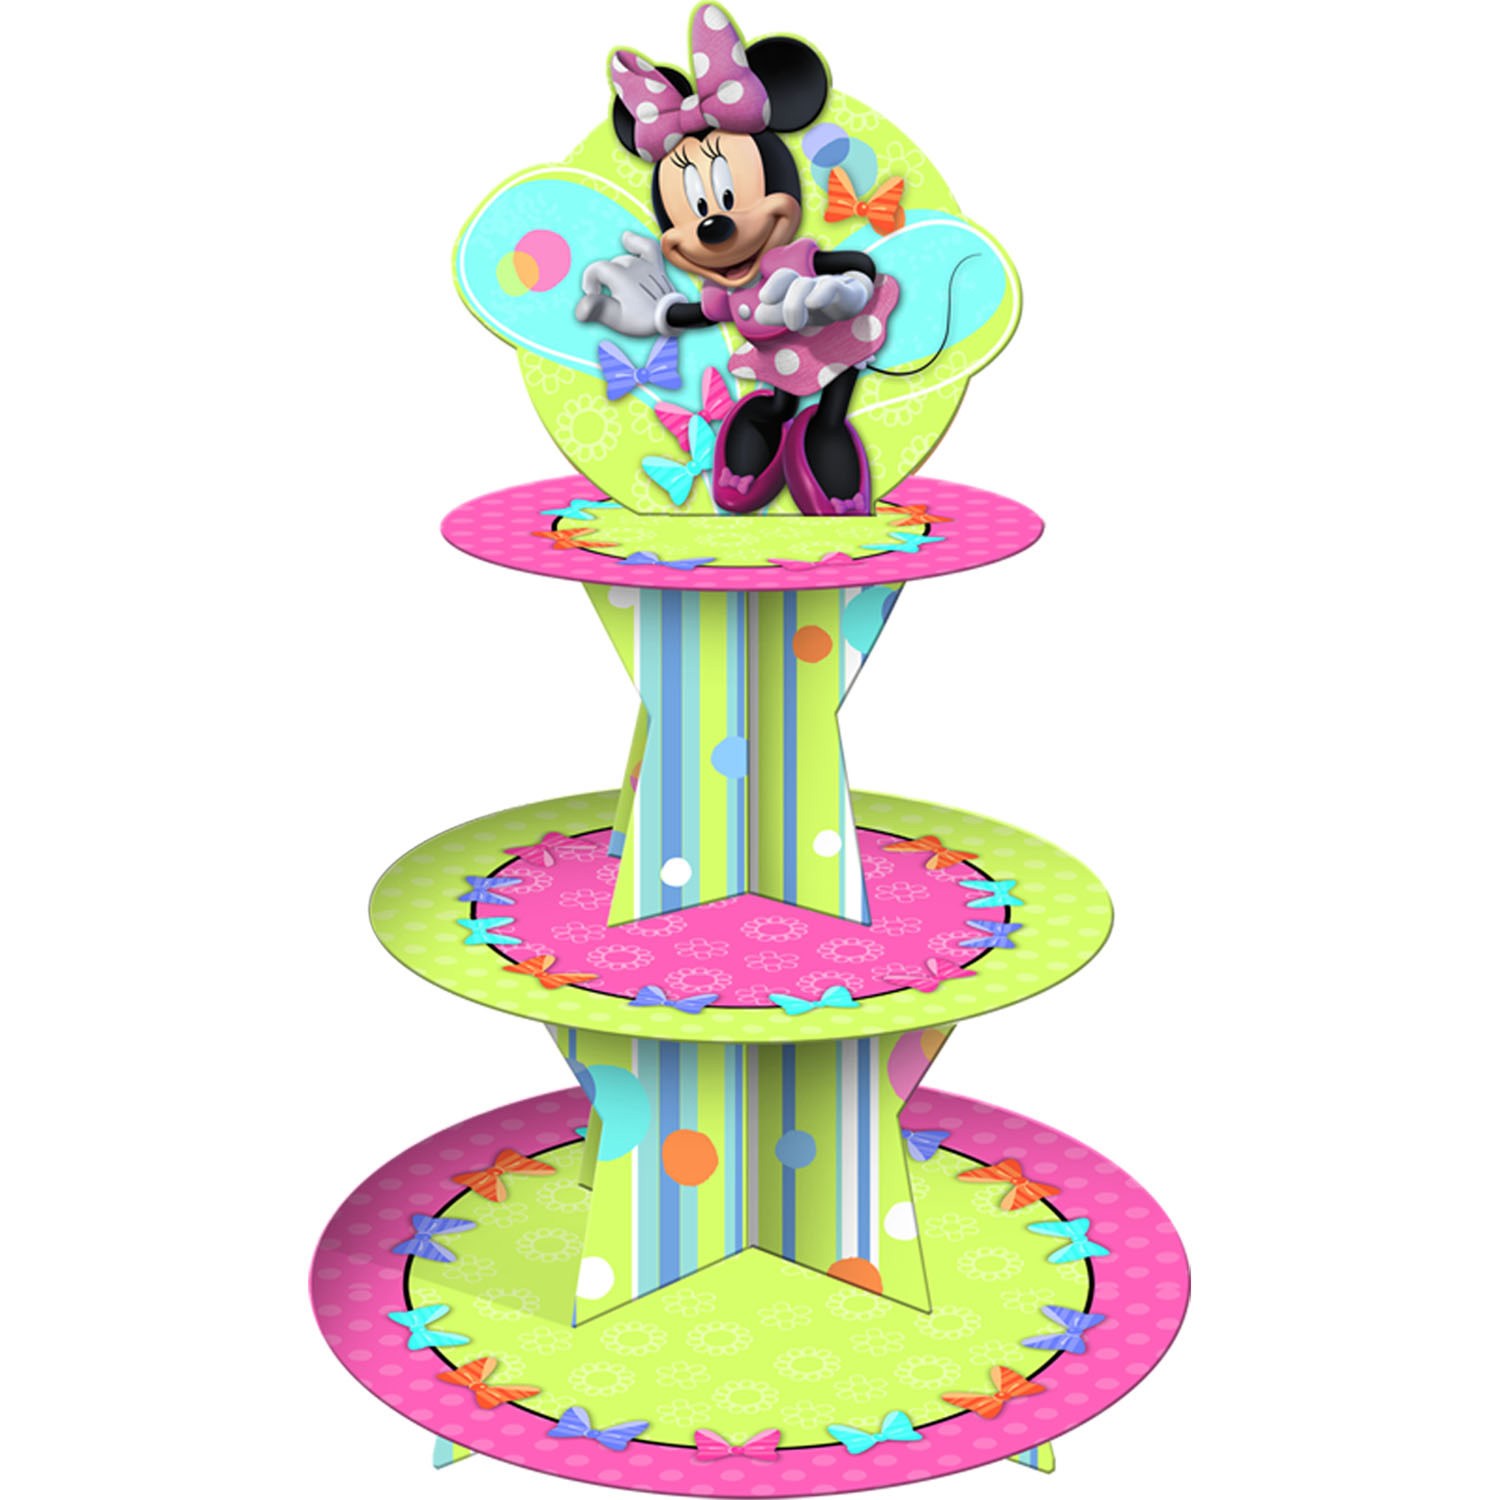 Disney Minnie Mouse Bow-tique Cupcake Stand